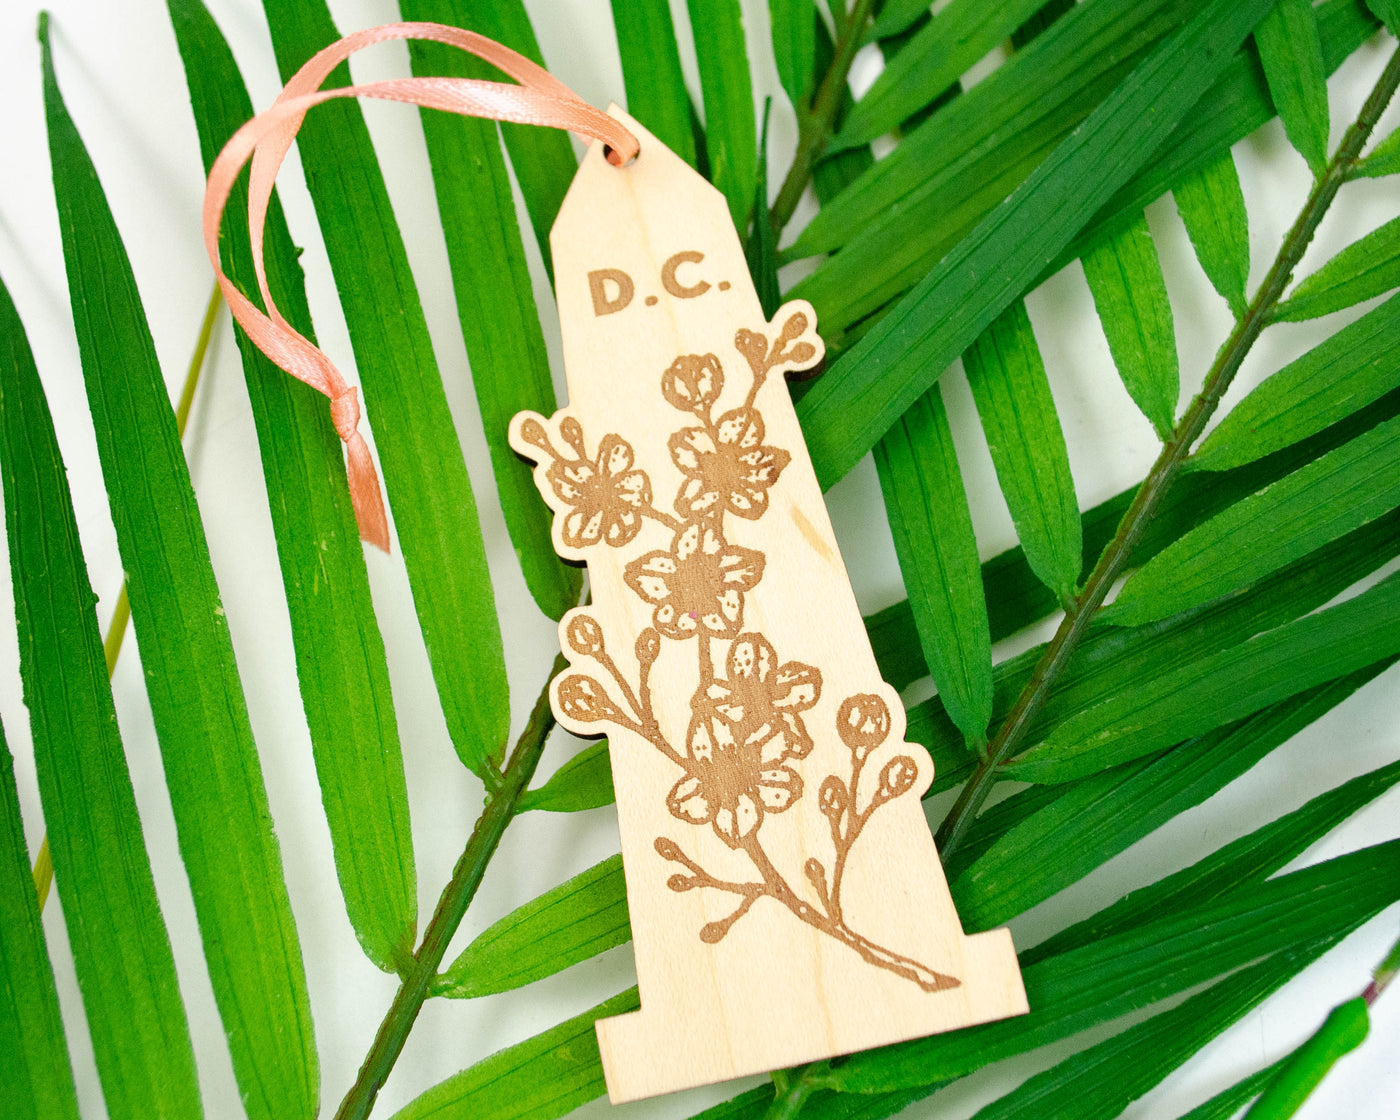 handmade laser cut maple wood ornament of the washington monument with cherry blossoms and the word "D.C." engraved at the top